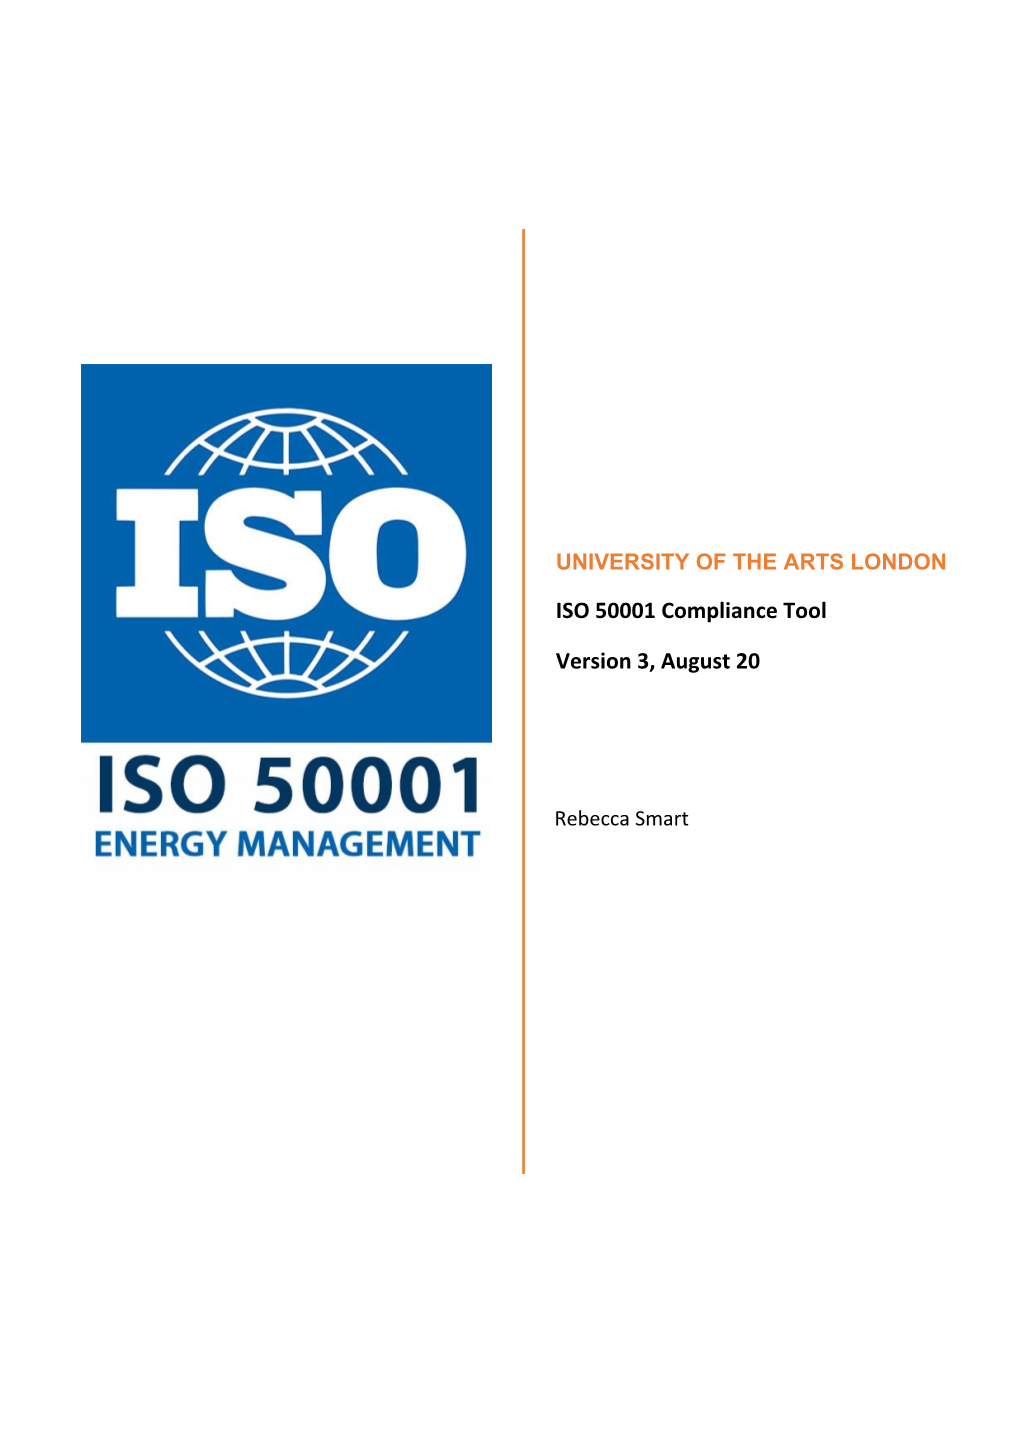 ISO 50001 Compliance Tool Version 3, August 20